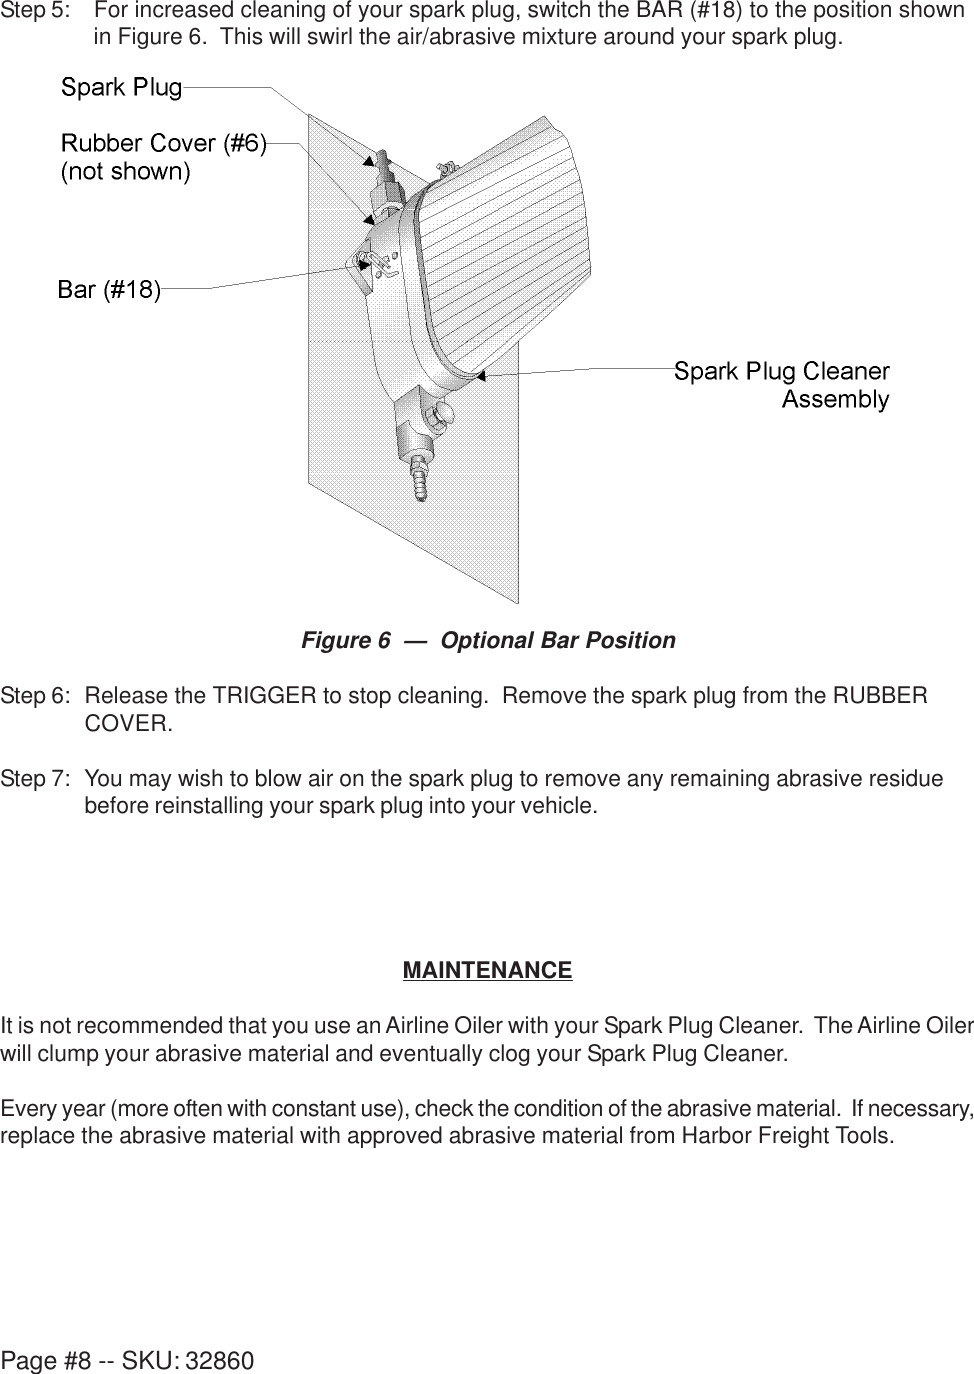 Page 8 of 10 - Harbor-Freight Harbor-Freight-Air-Spark-Plug-Cleaner-Product-Manual- 32860 Manual April 04  Harbor-freight-air-spark-plug-cleaner-product-manual